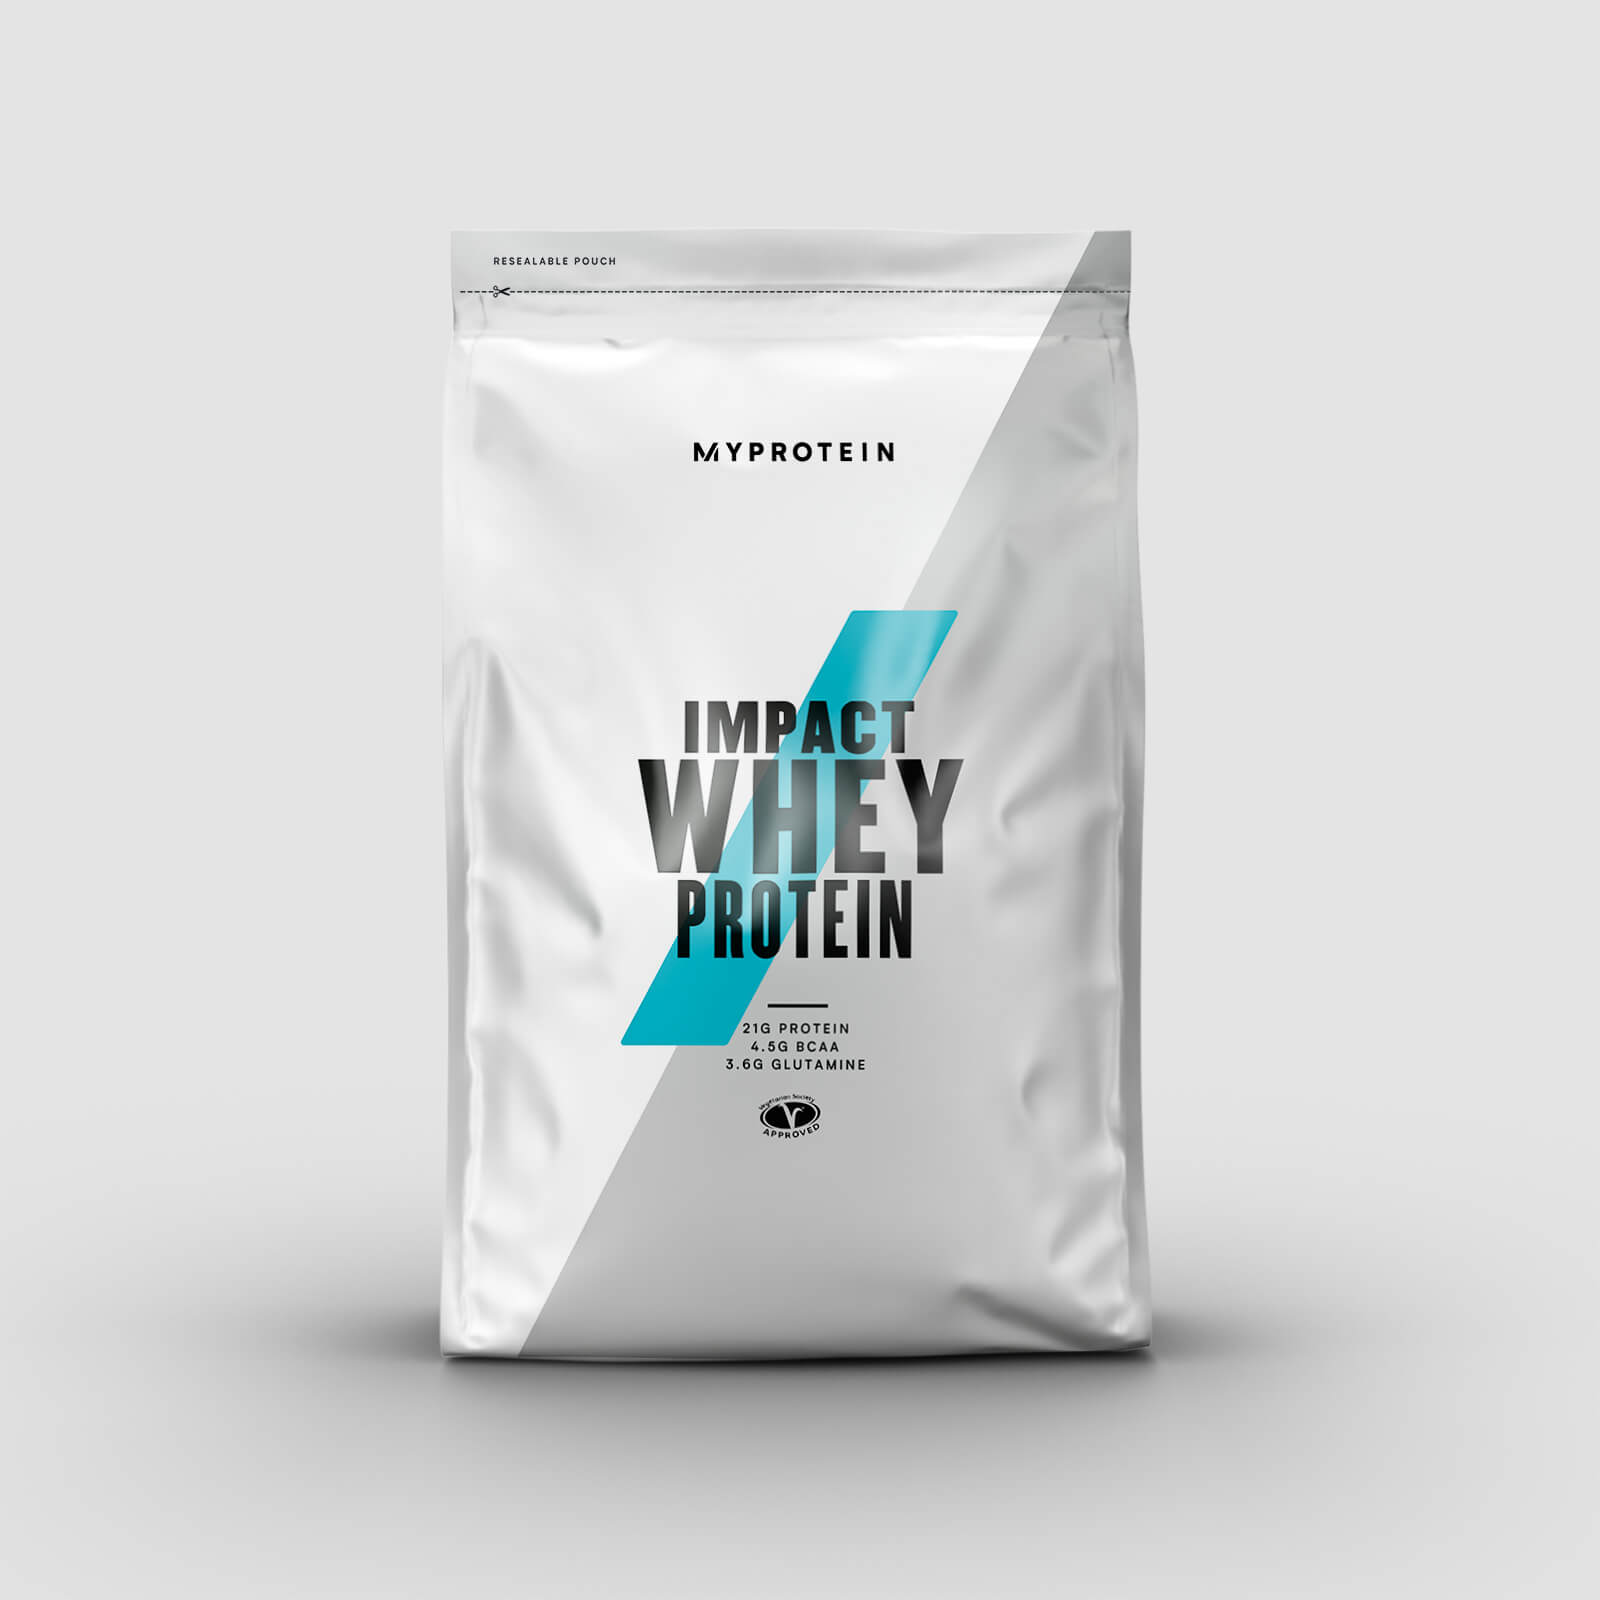 Myprotein Impact Whey Protein - 1kg - Rocky Road - New and Improved